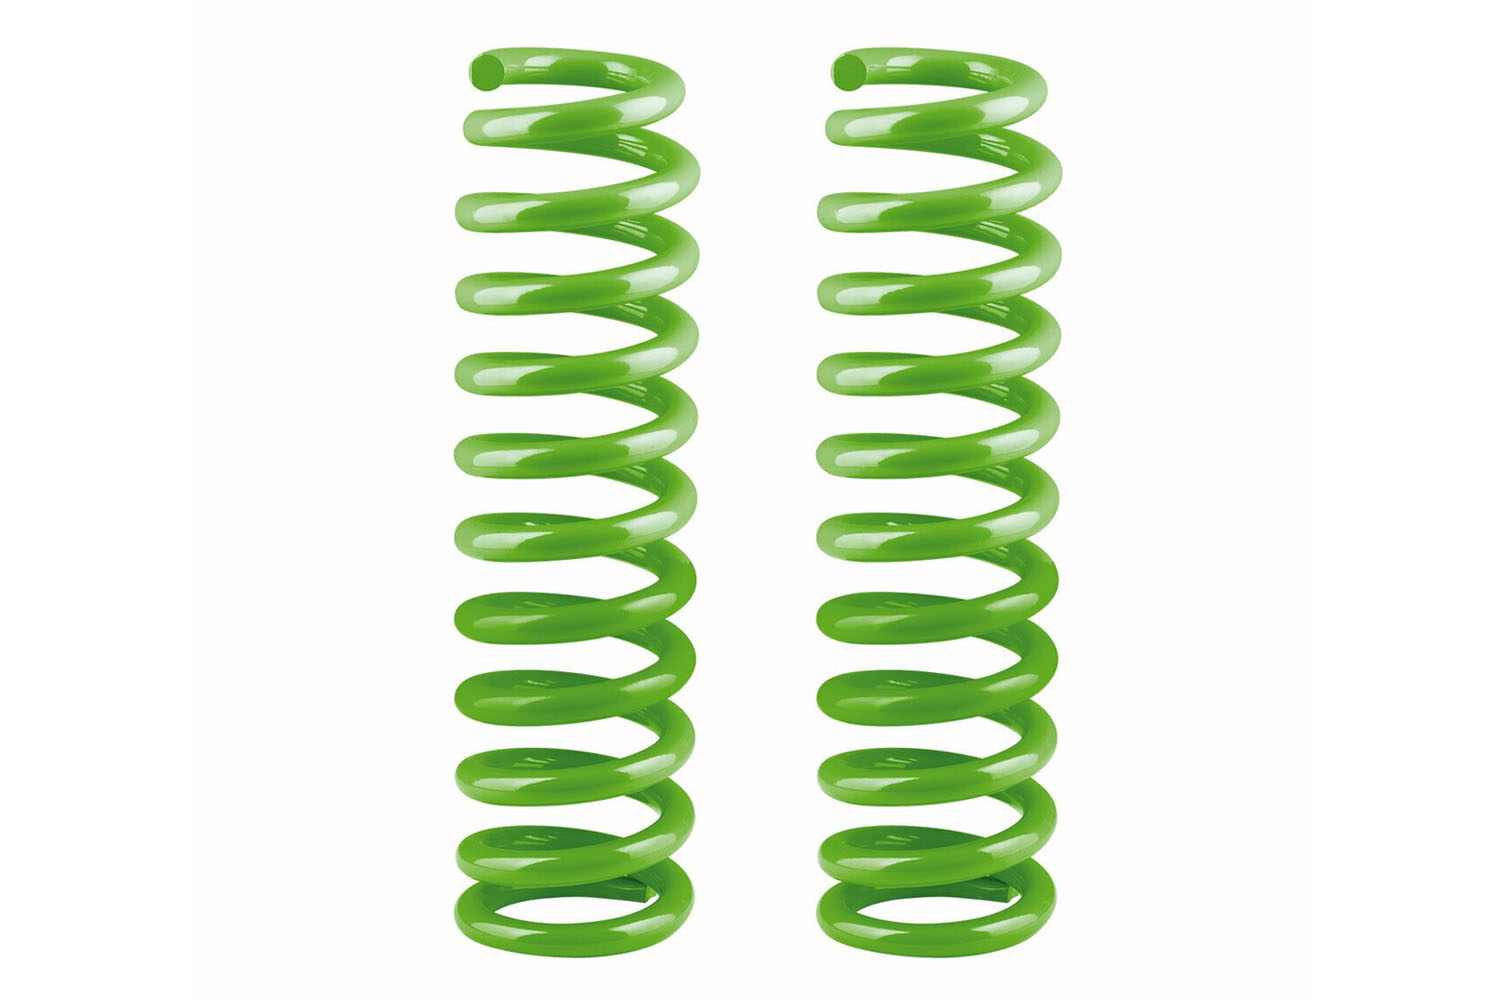 LWB/Grand Vitara 4 Cyl Carb Front Coil Springs - Performance Load (0-110LBS) Suited For 1988-98 Suzuki Sidekick